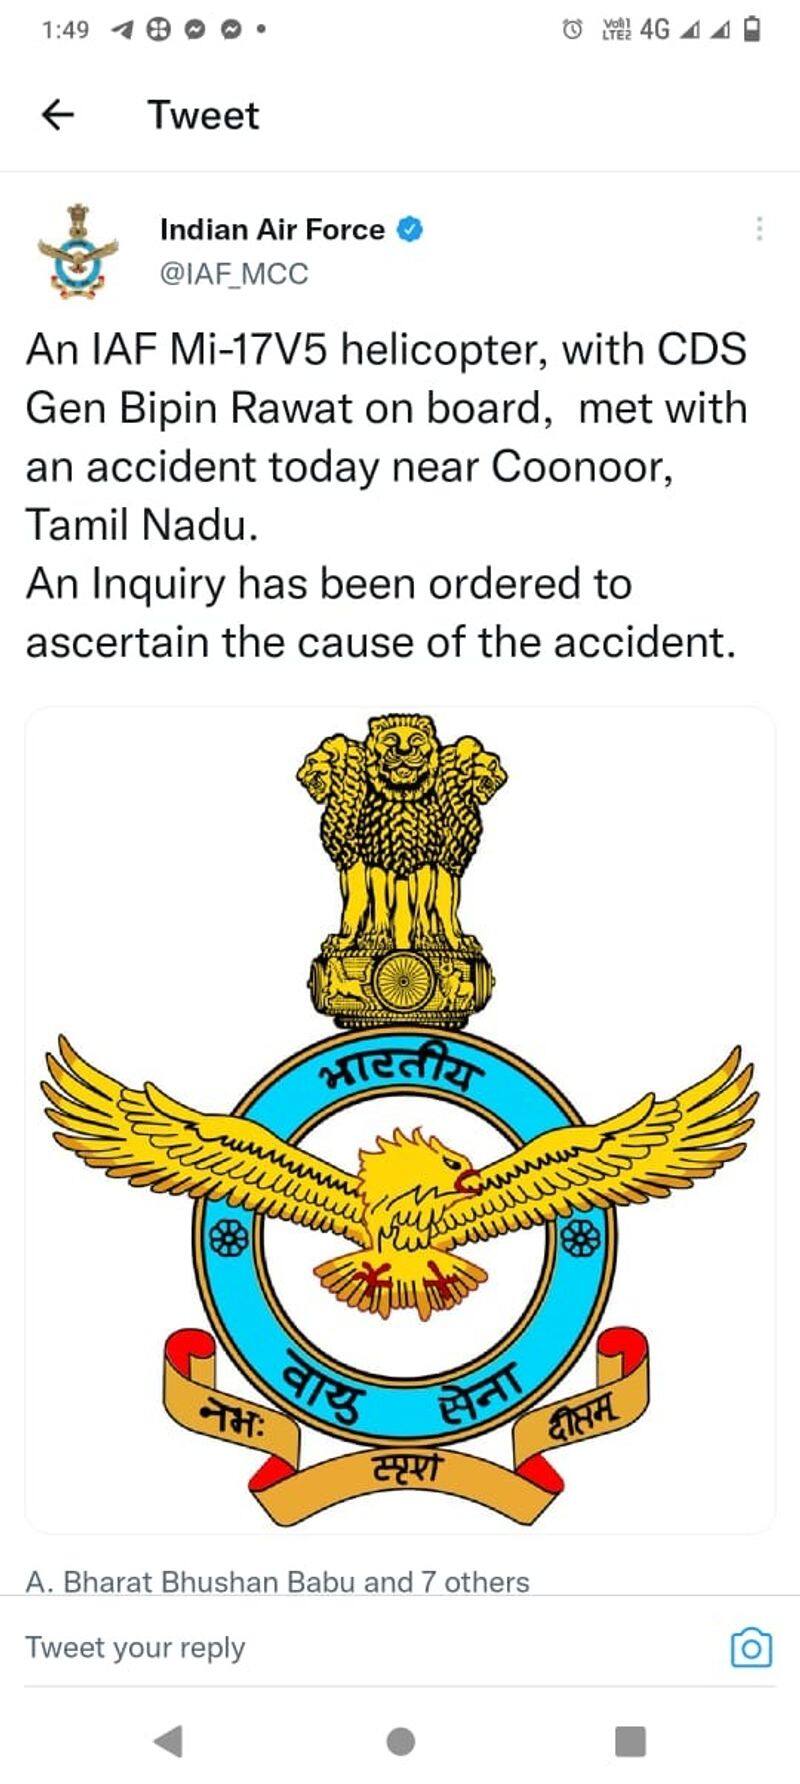 An official statement said that a total of 14 people  including General Bipin Rawat and his wife  were on board the crashed helicopter